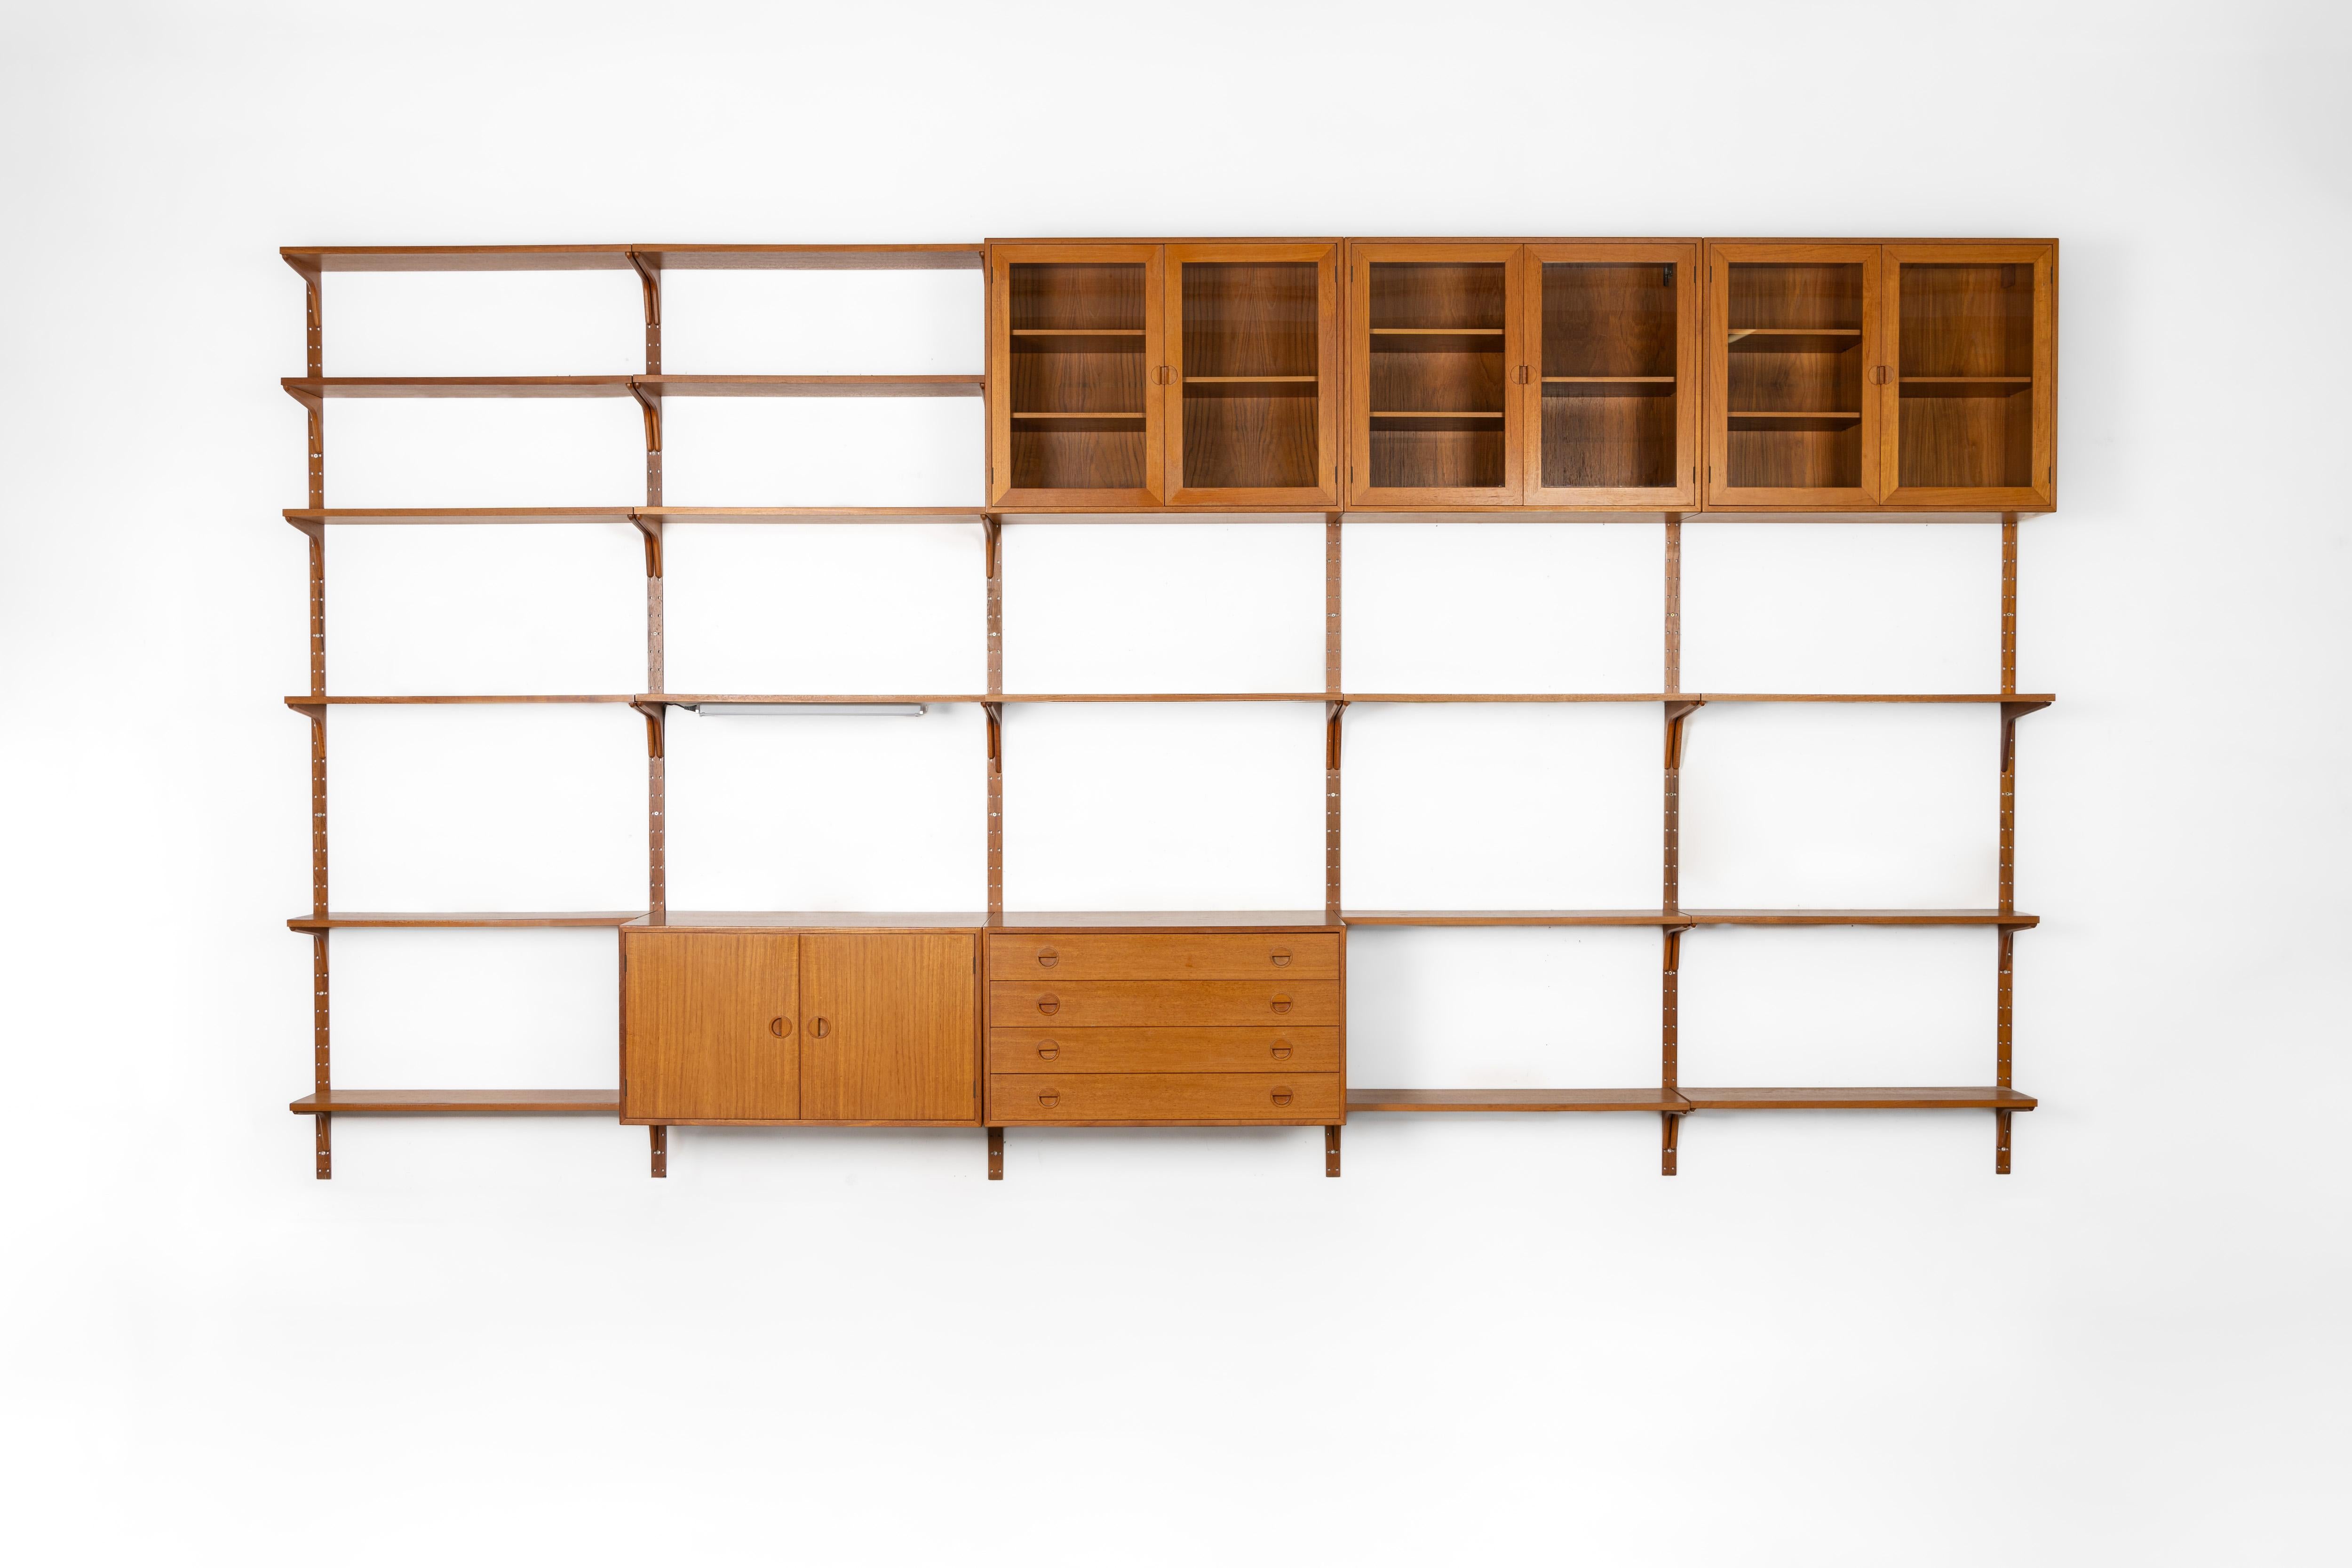 Danish modular wall unit by Rud Thygesen for HG Furtniture. This teak setup has one drawer cabinet, one storage cabinet, three display cabinets and 17 bookshelves. The cabinets are marked by the producer. Always adaptable and further